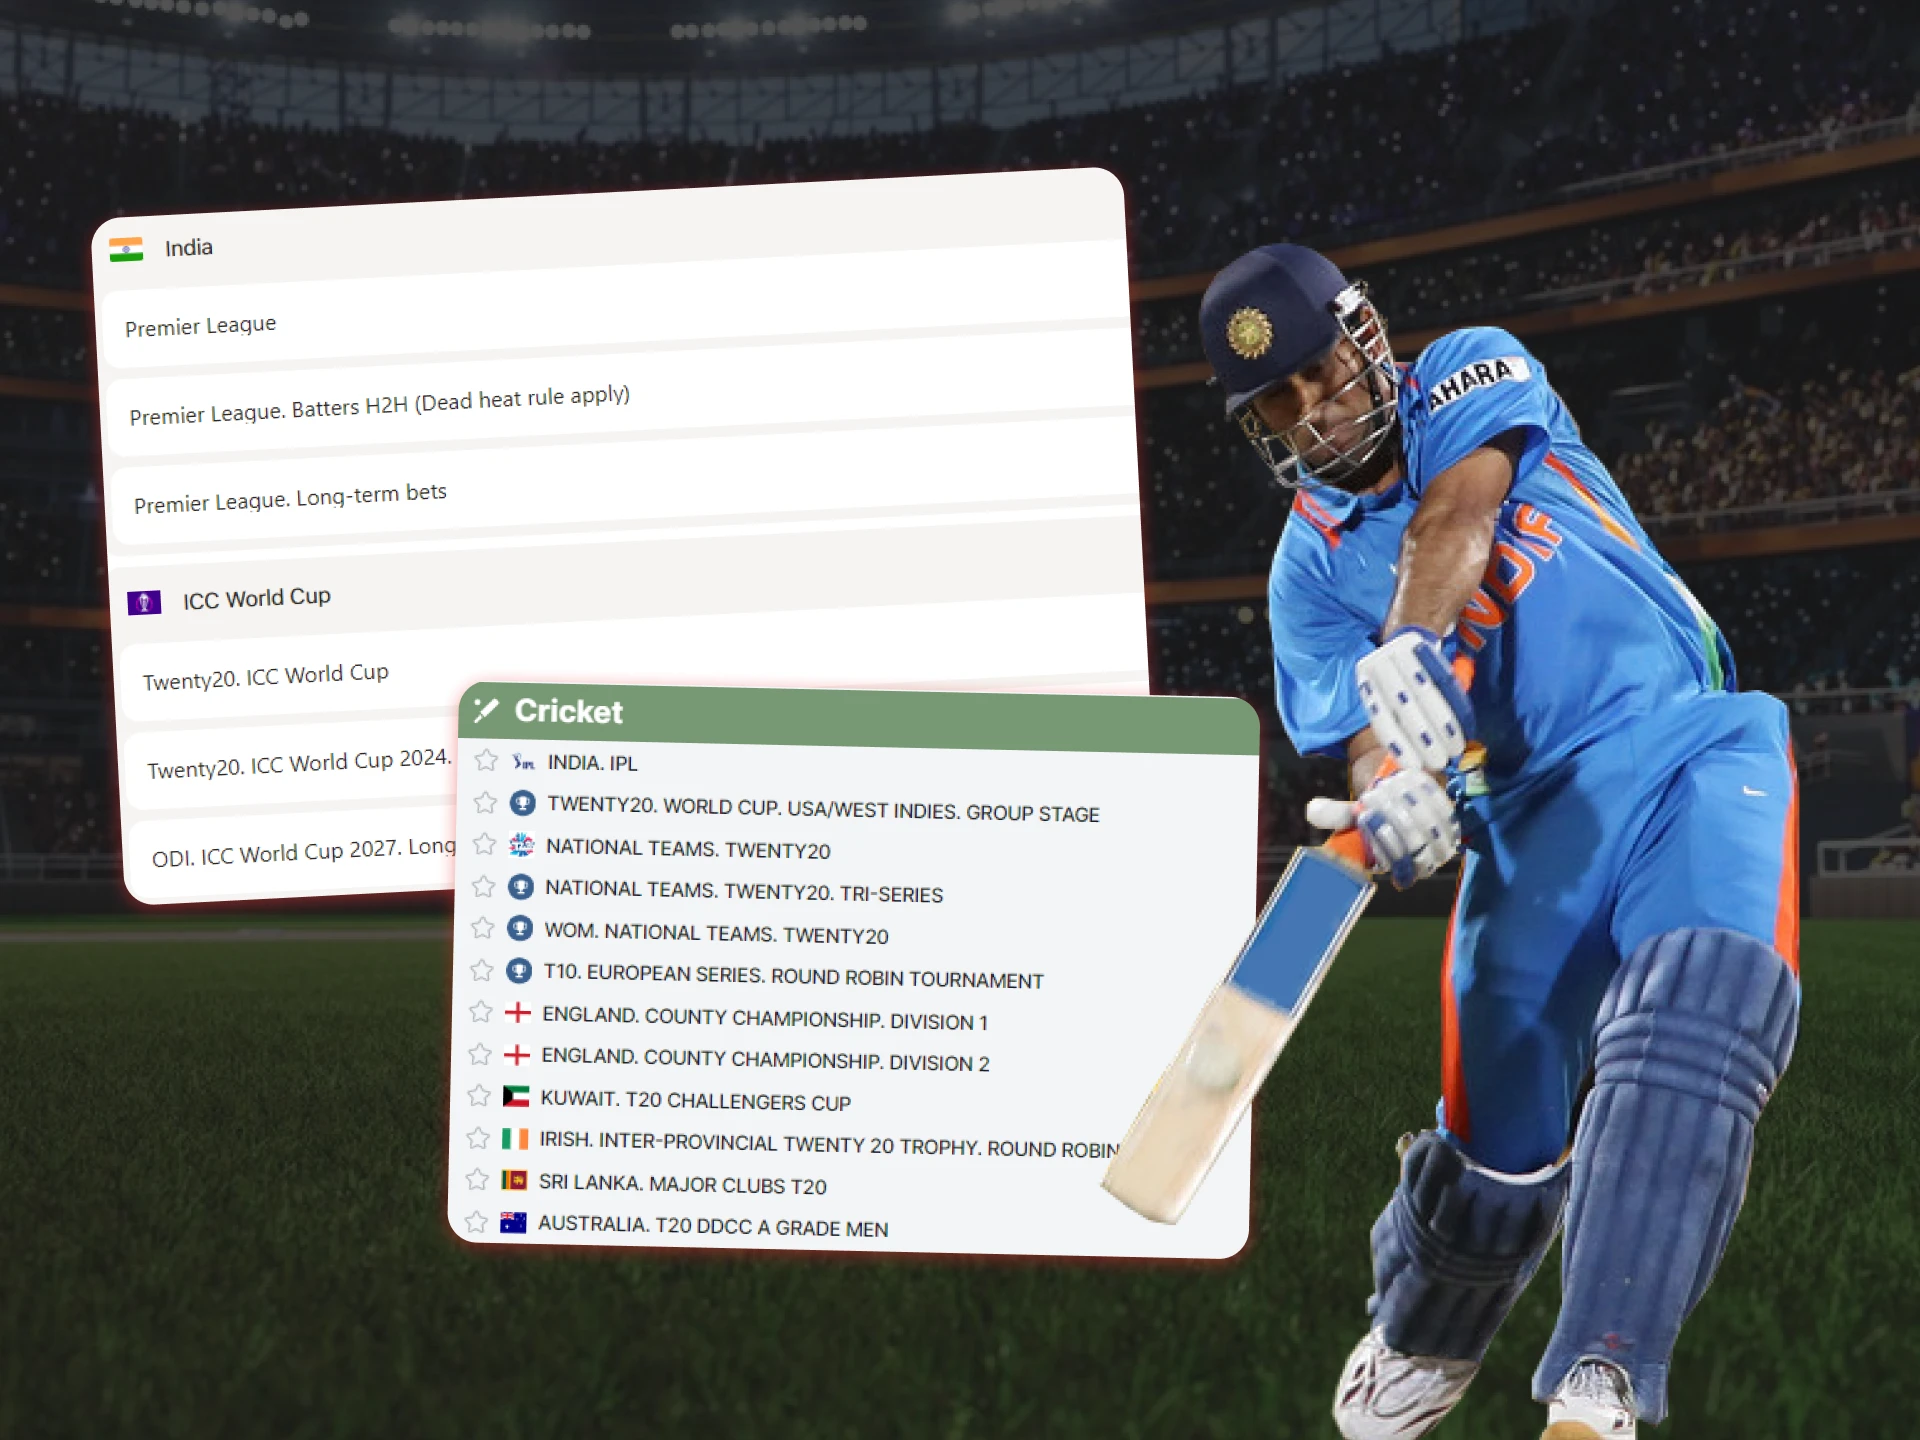 Cricket is one of the most popular sports available for betting. Each bookmaker has a separate section for convenient betting on cricket.